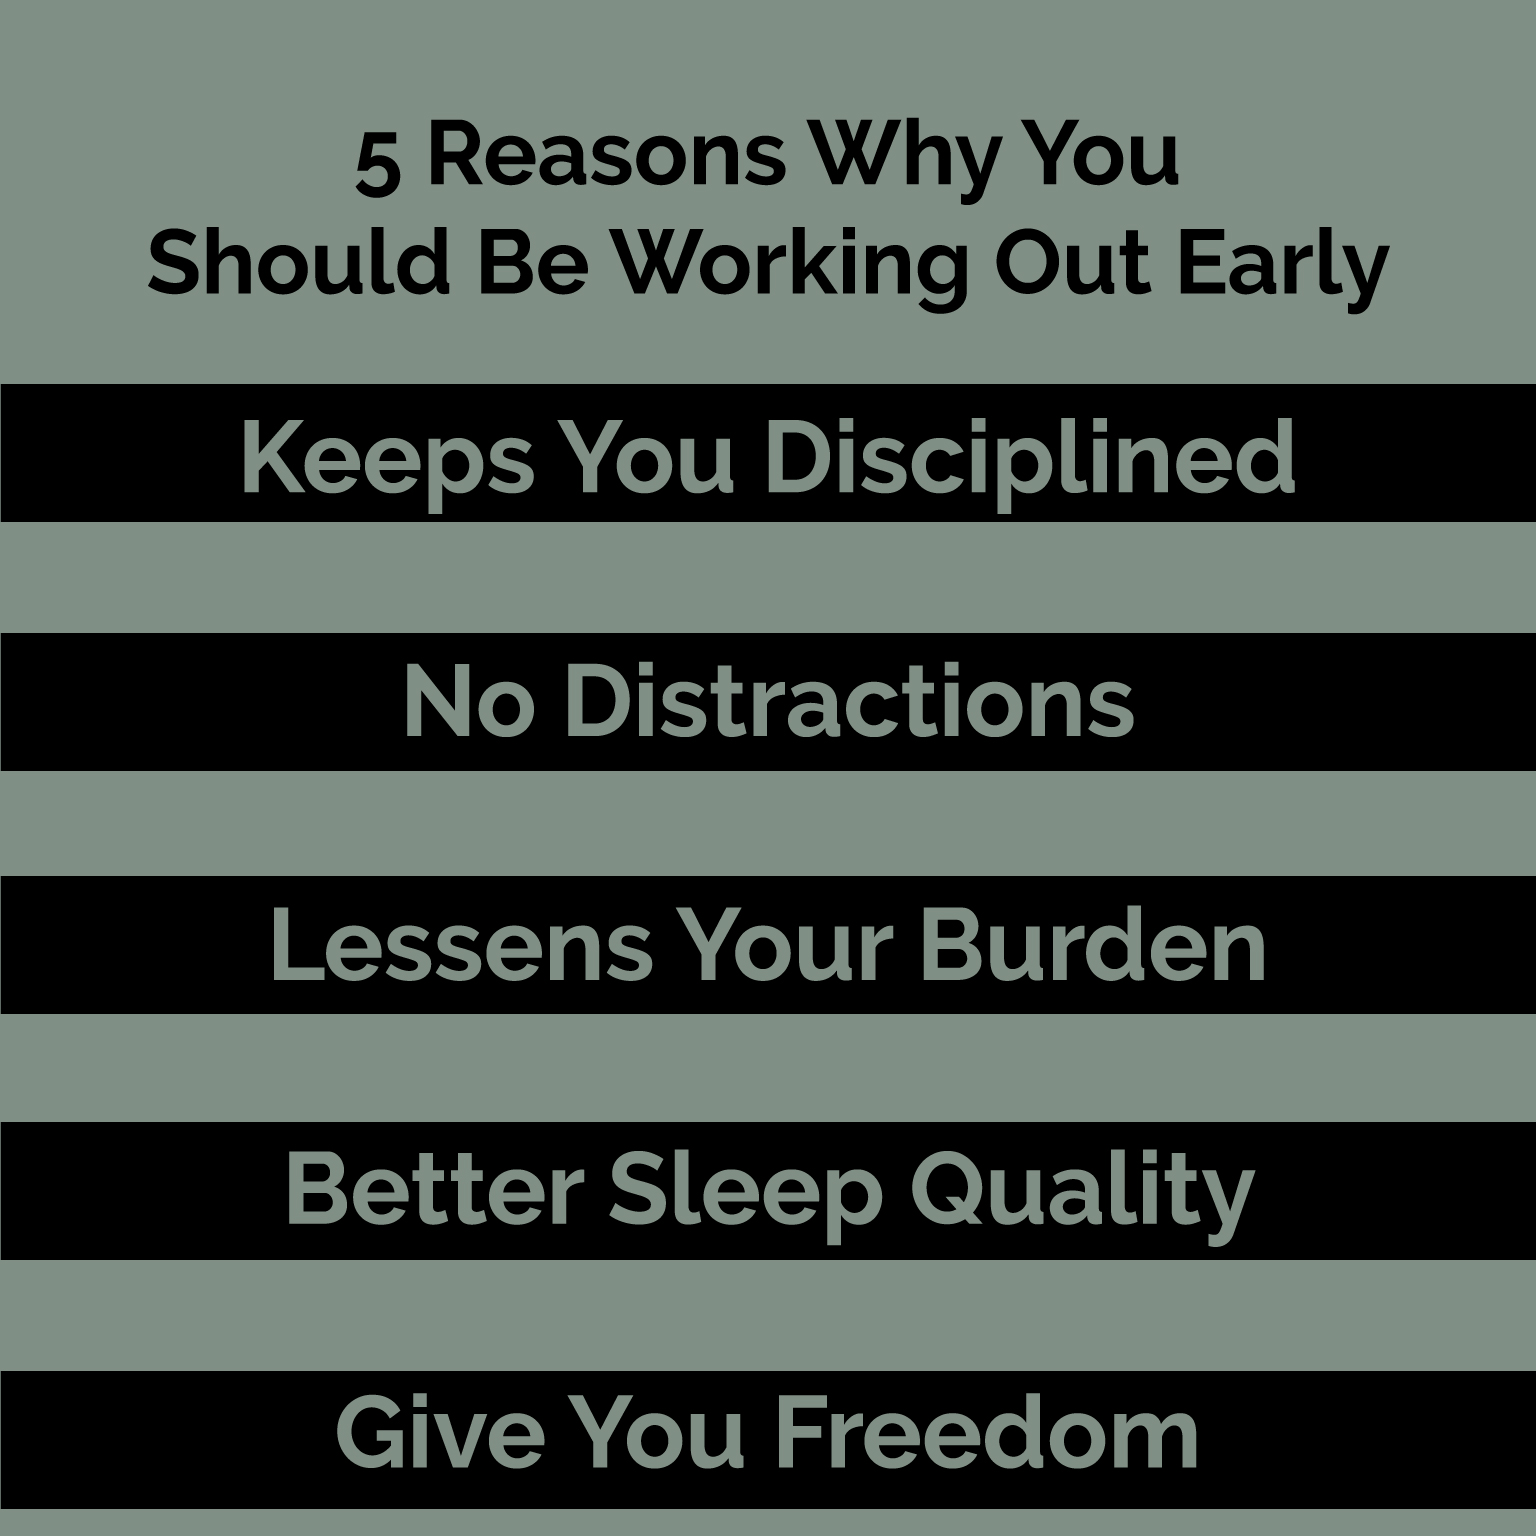 5-reasons-why-you-should-be-wroking-out-early-info-1